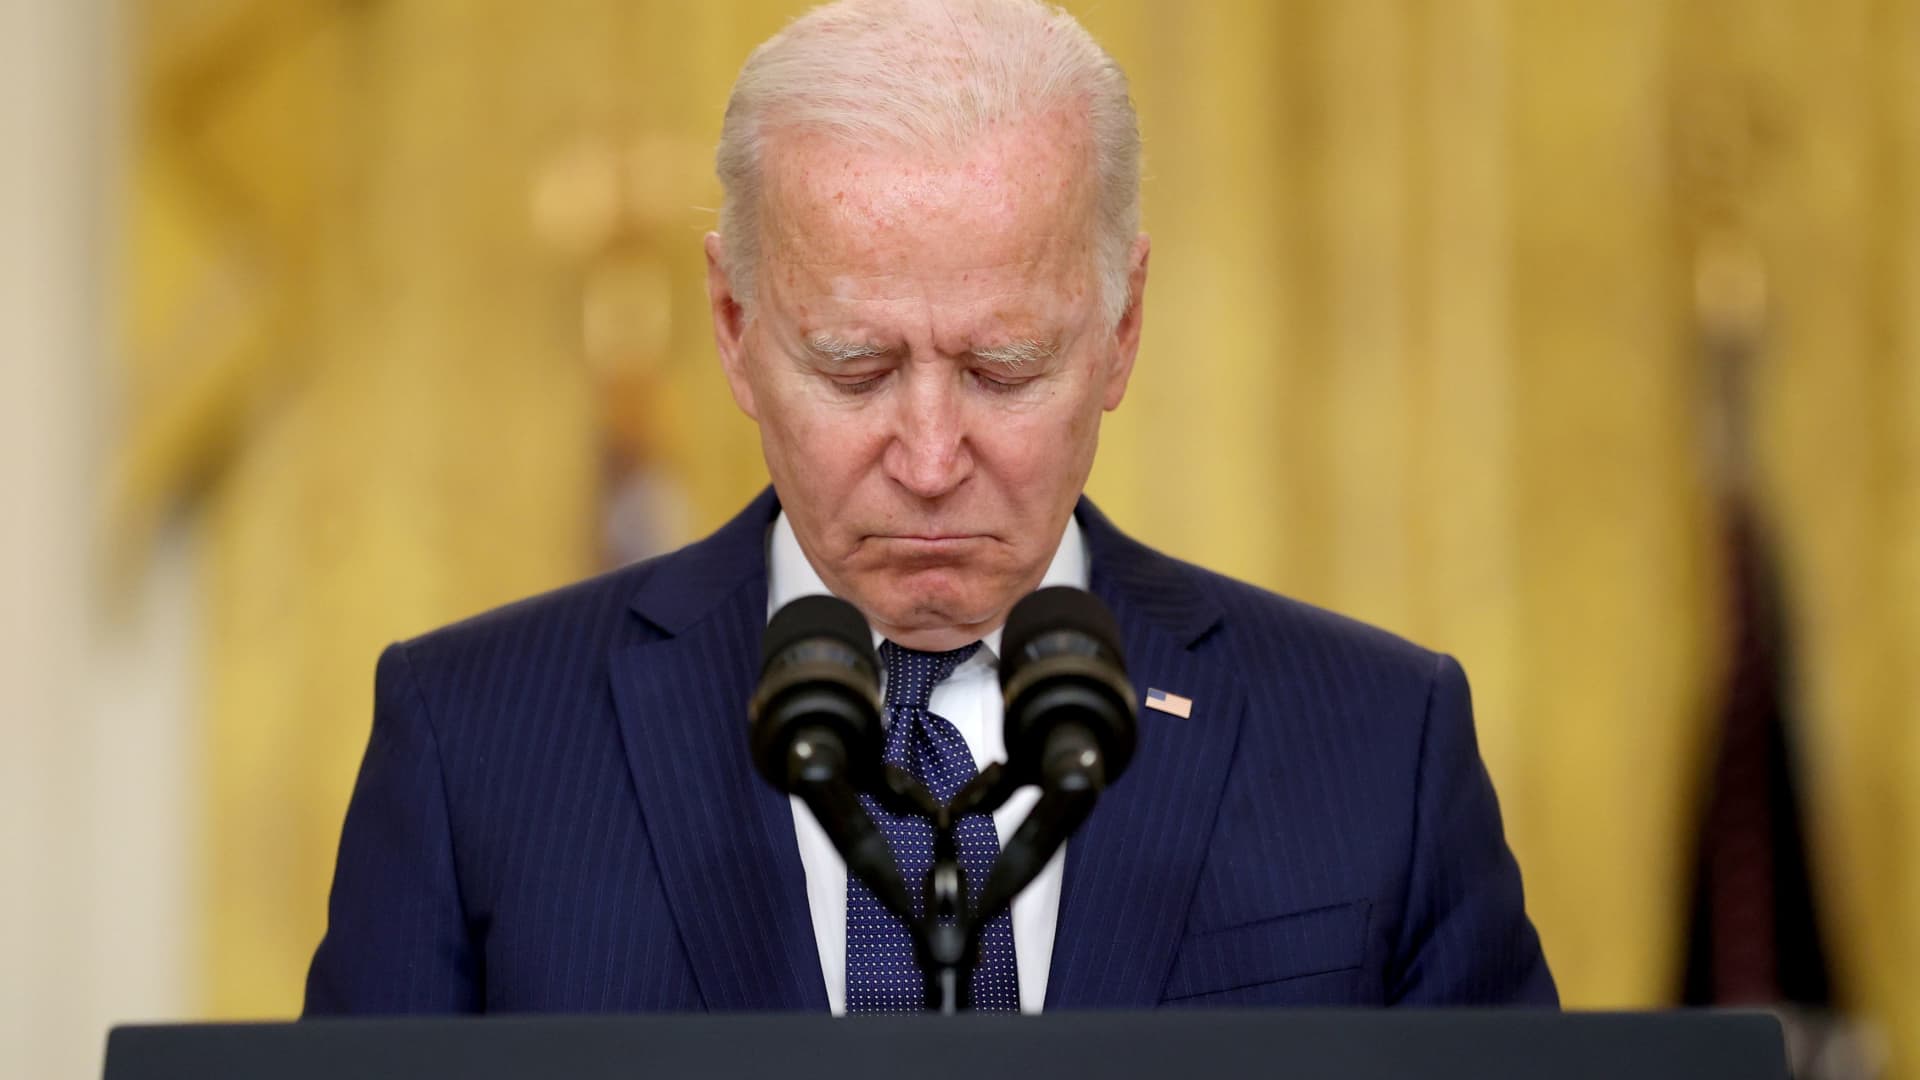 U.S. President Joe Biden reacts during a moment of silence for the dead as he delivers remarks about Afghanistan, from the East Room of the White House in Washington, August 26, 2021.